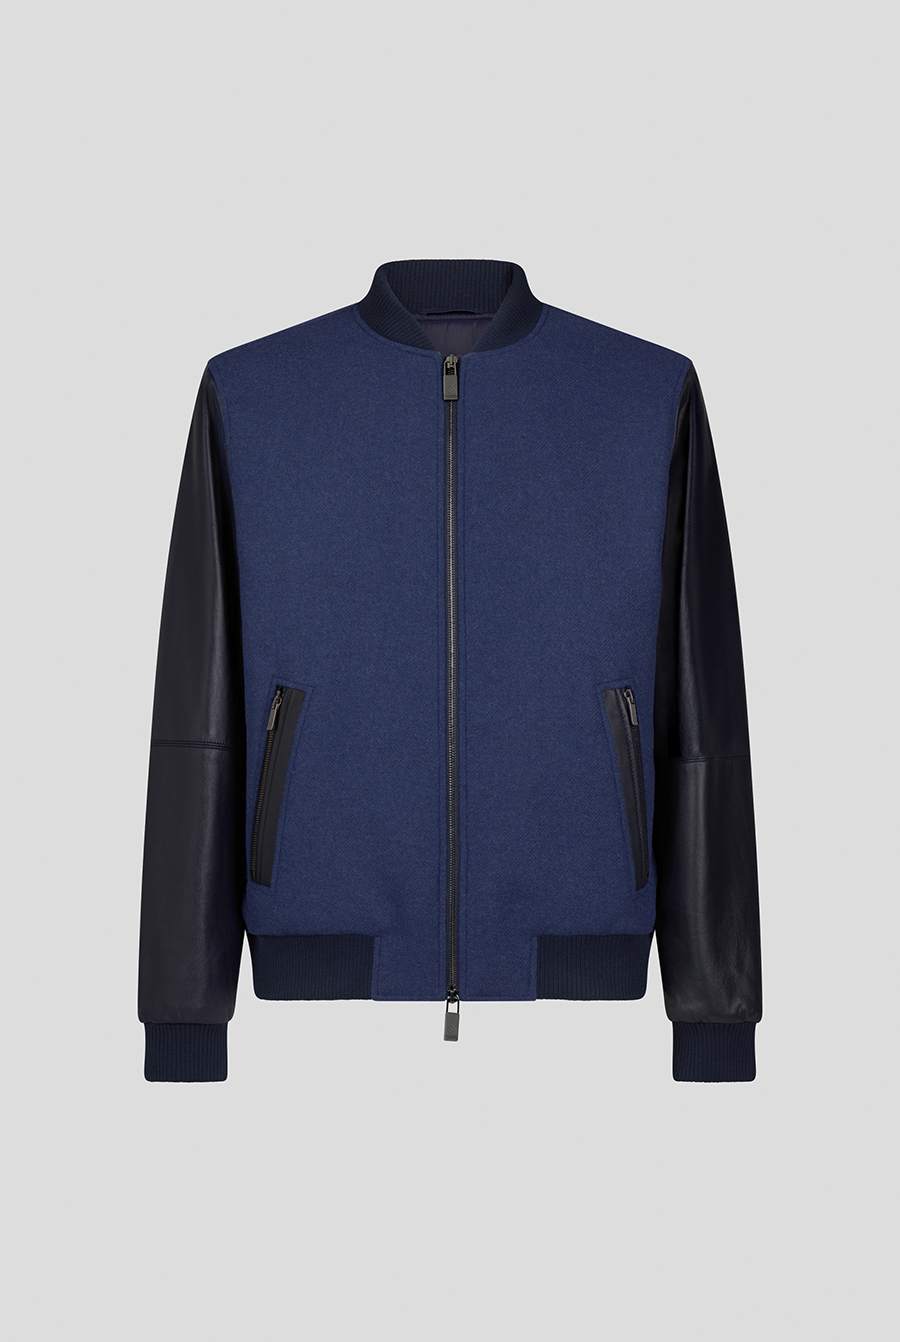 Varsity Jacket in wool and leather BLUE Pal Zileri